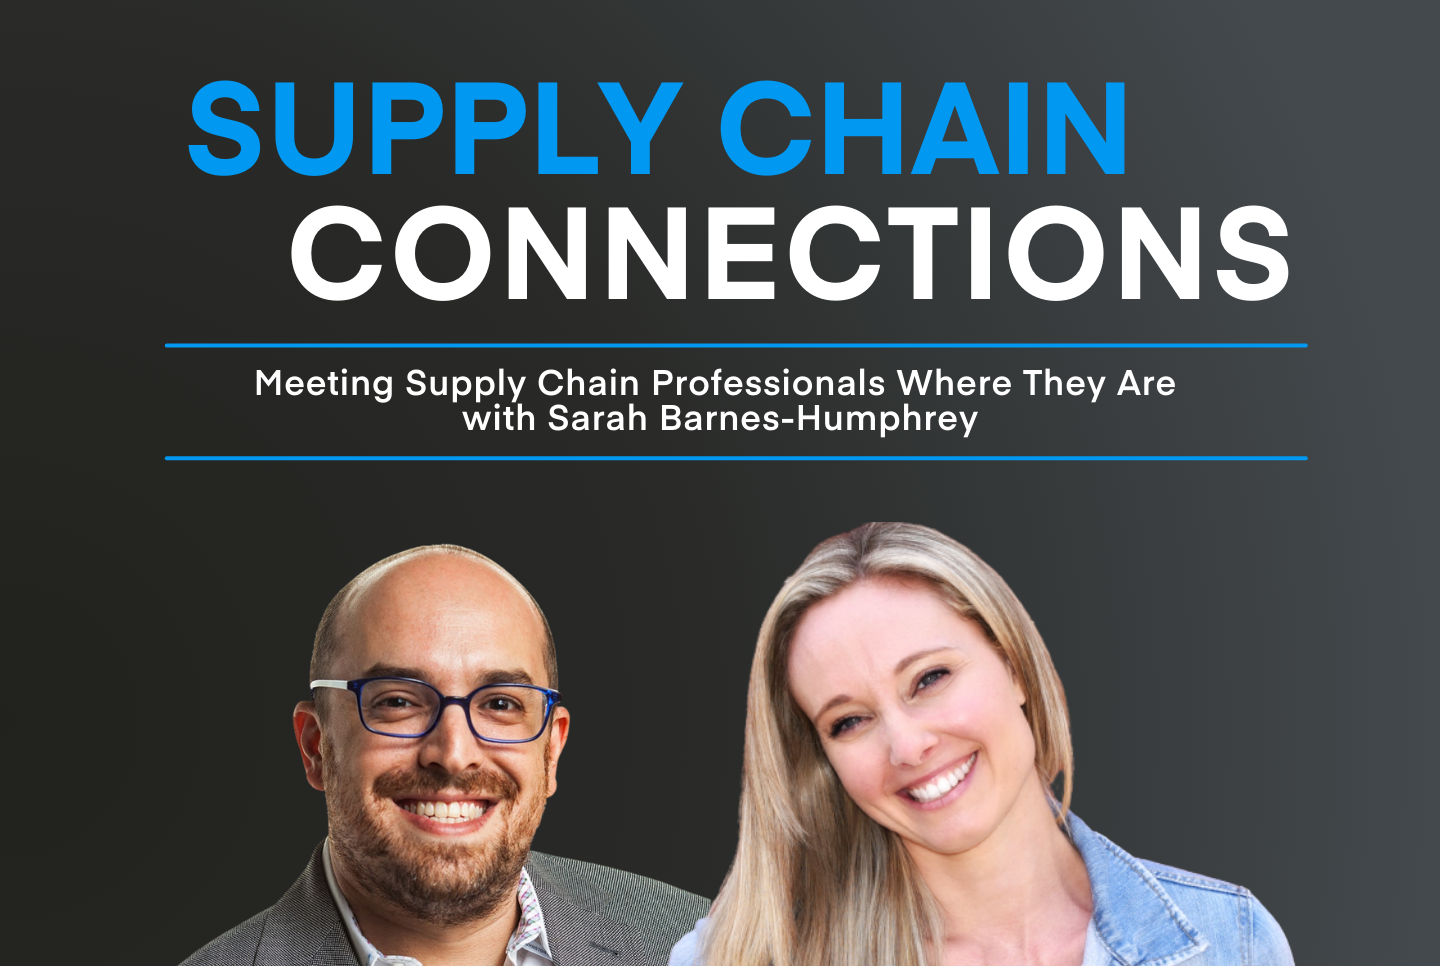 Meeting Supply Chain Professionals Where They Are with Sarah Barnes-Humphrey